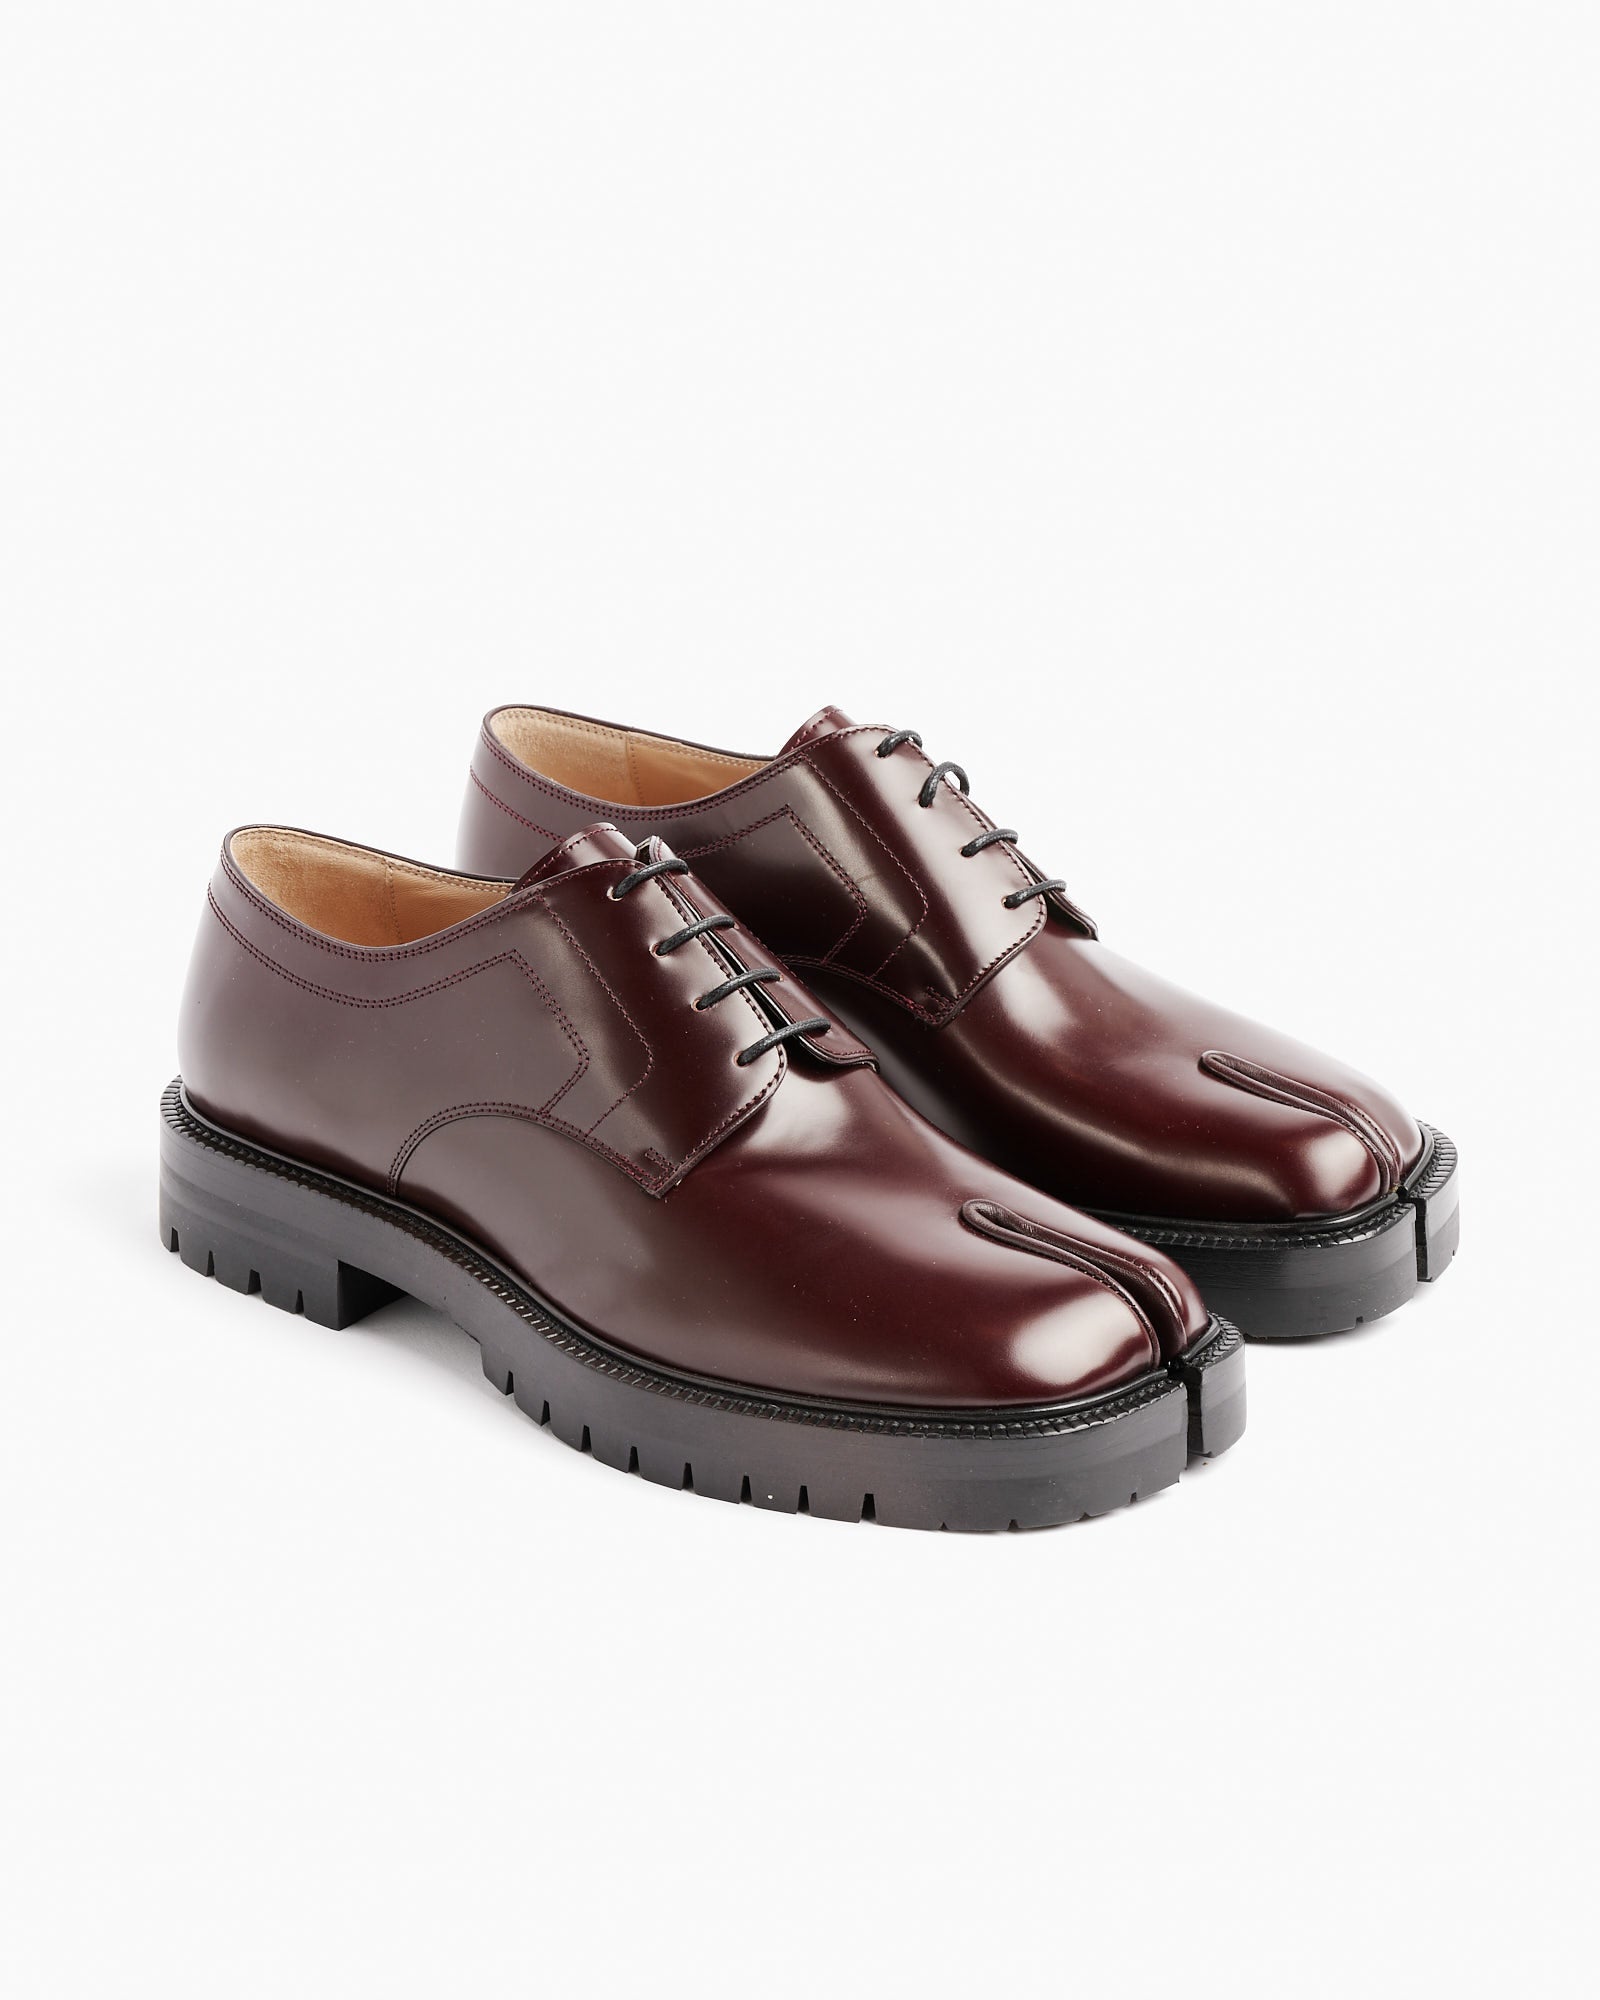 Tabi County Lace-Up in Brown